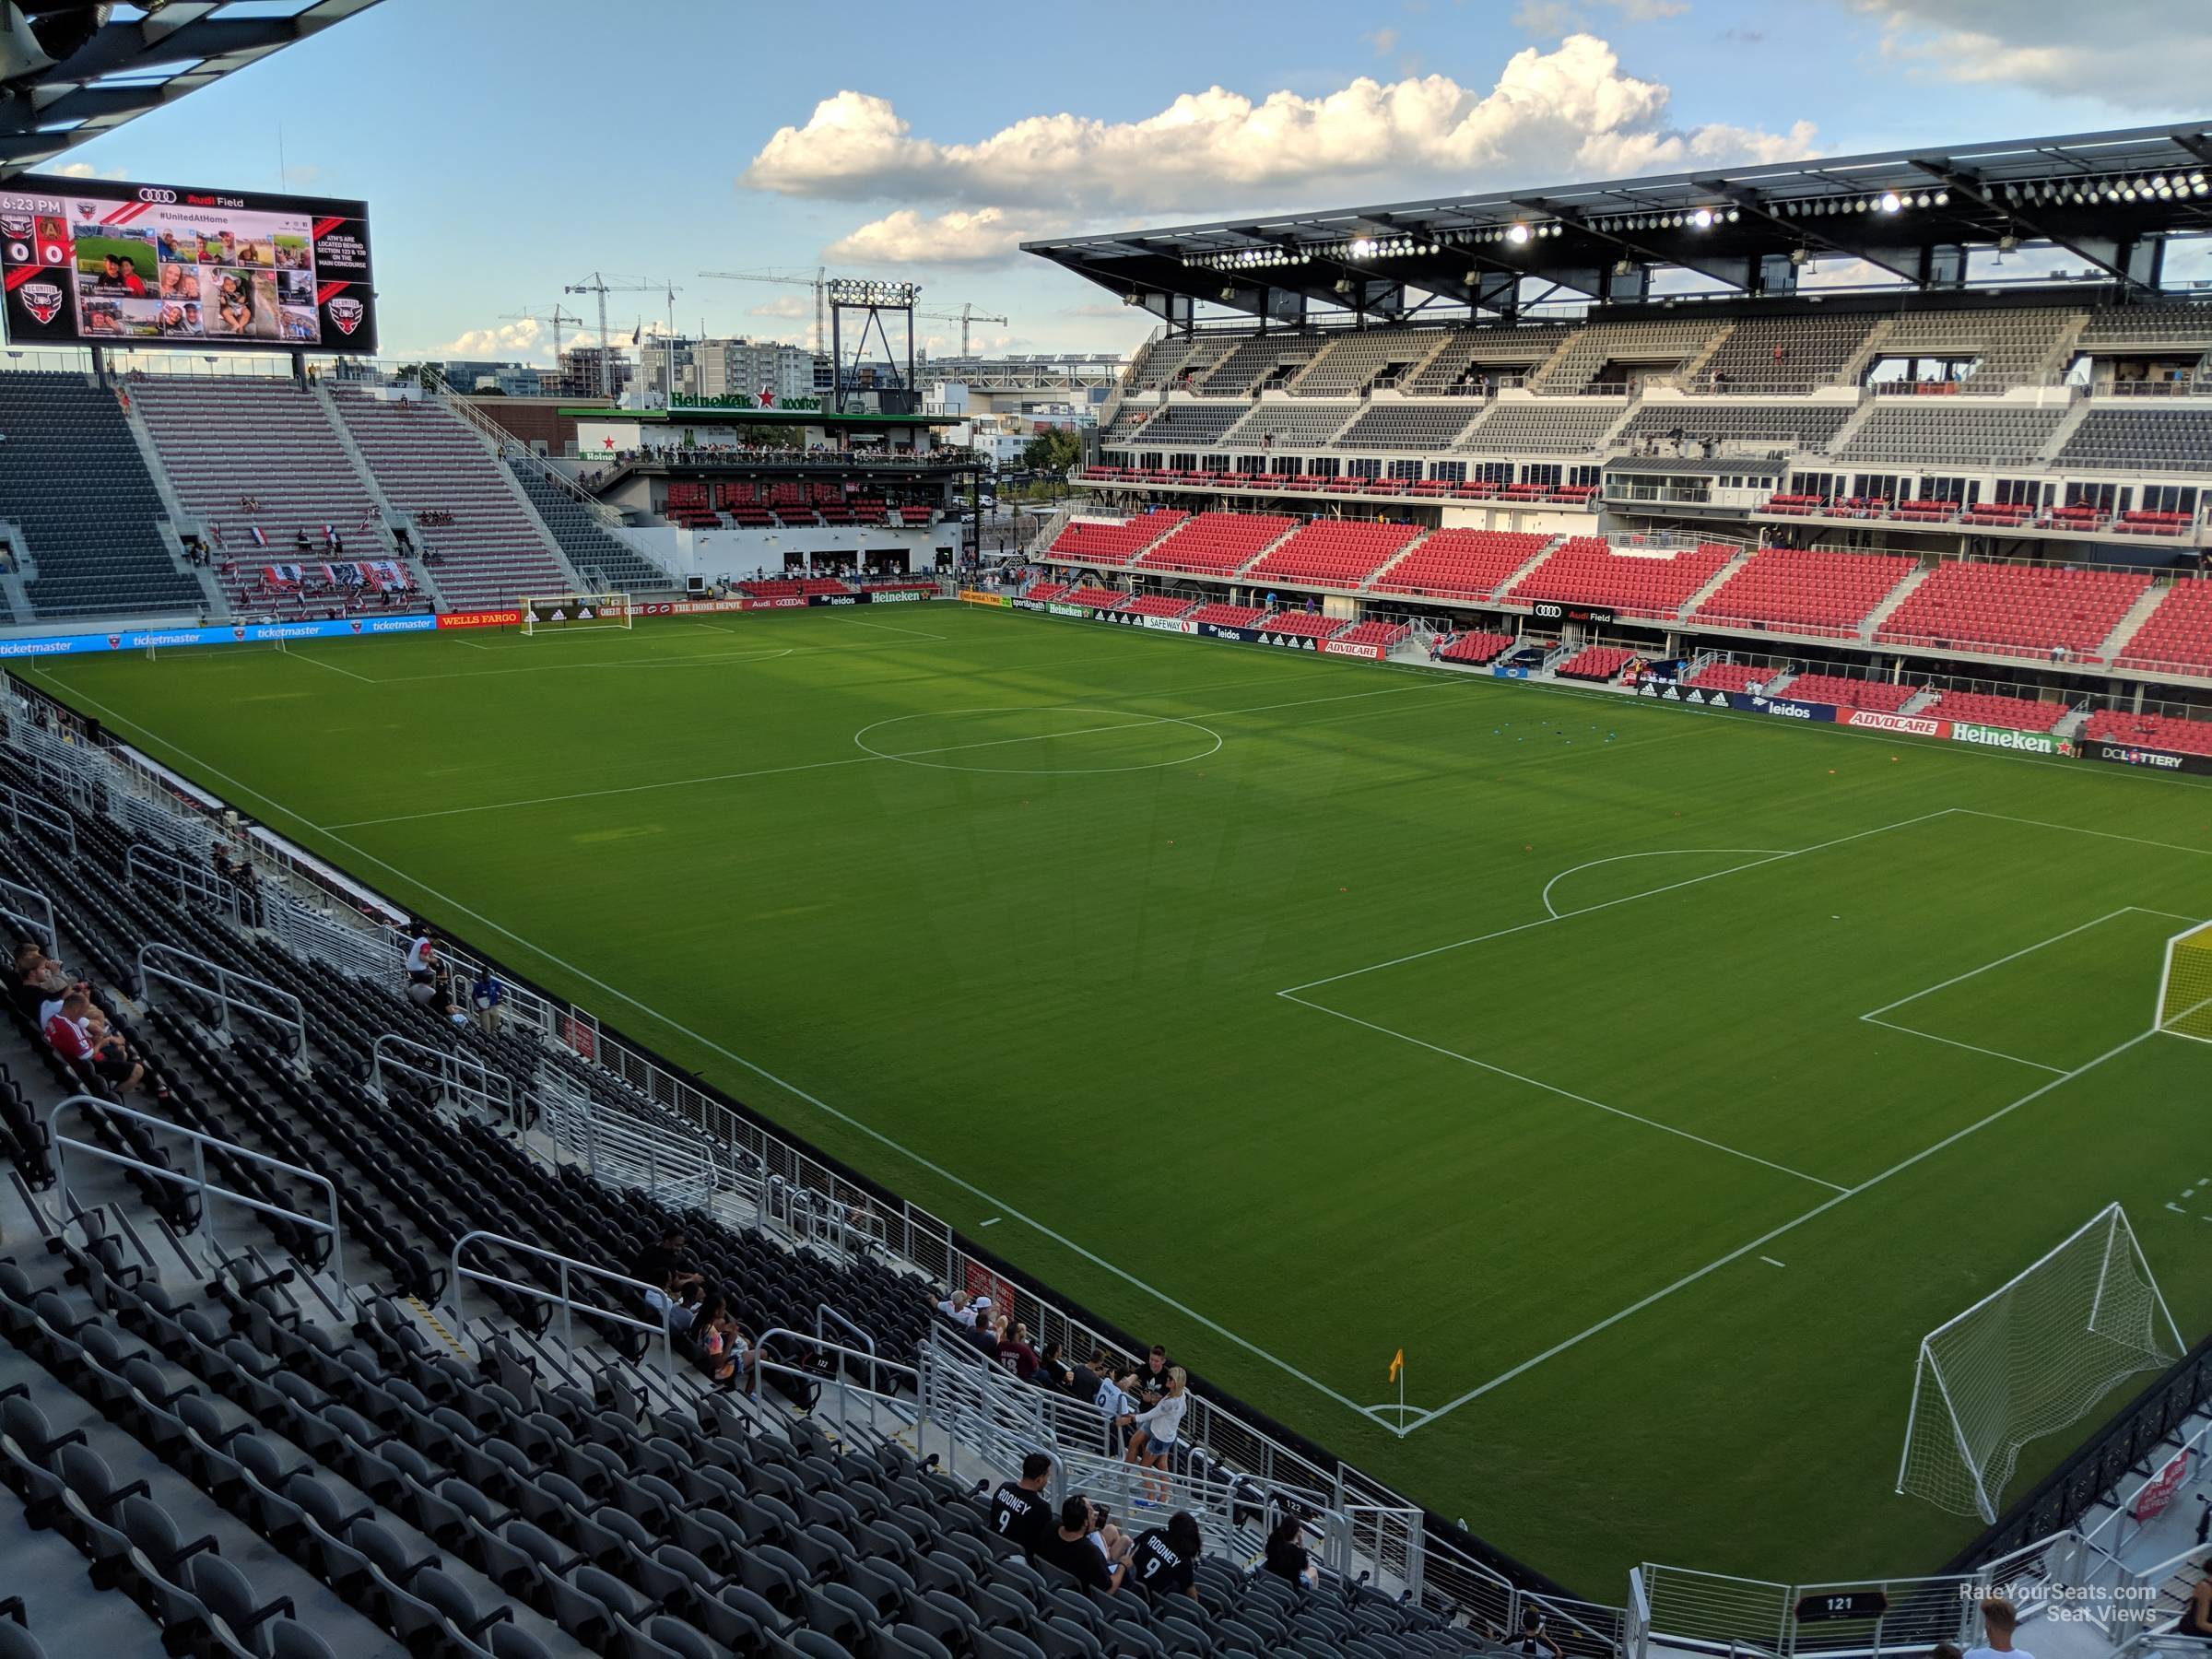 section 122, row 23 seat view  - audi field